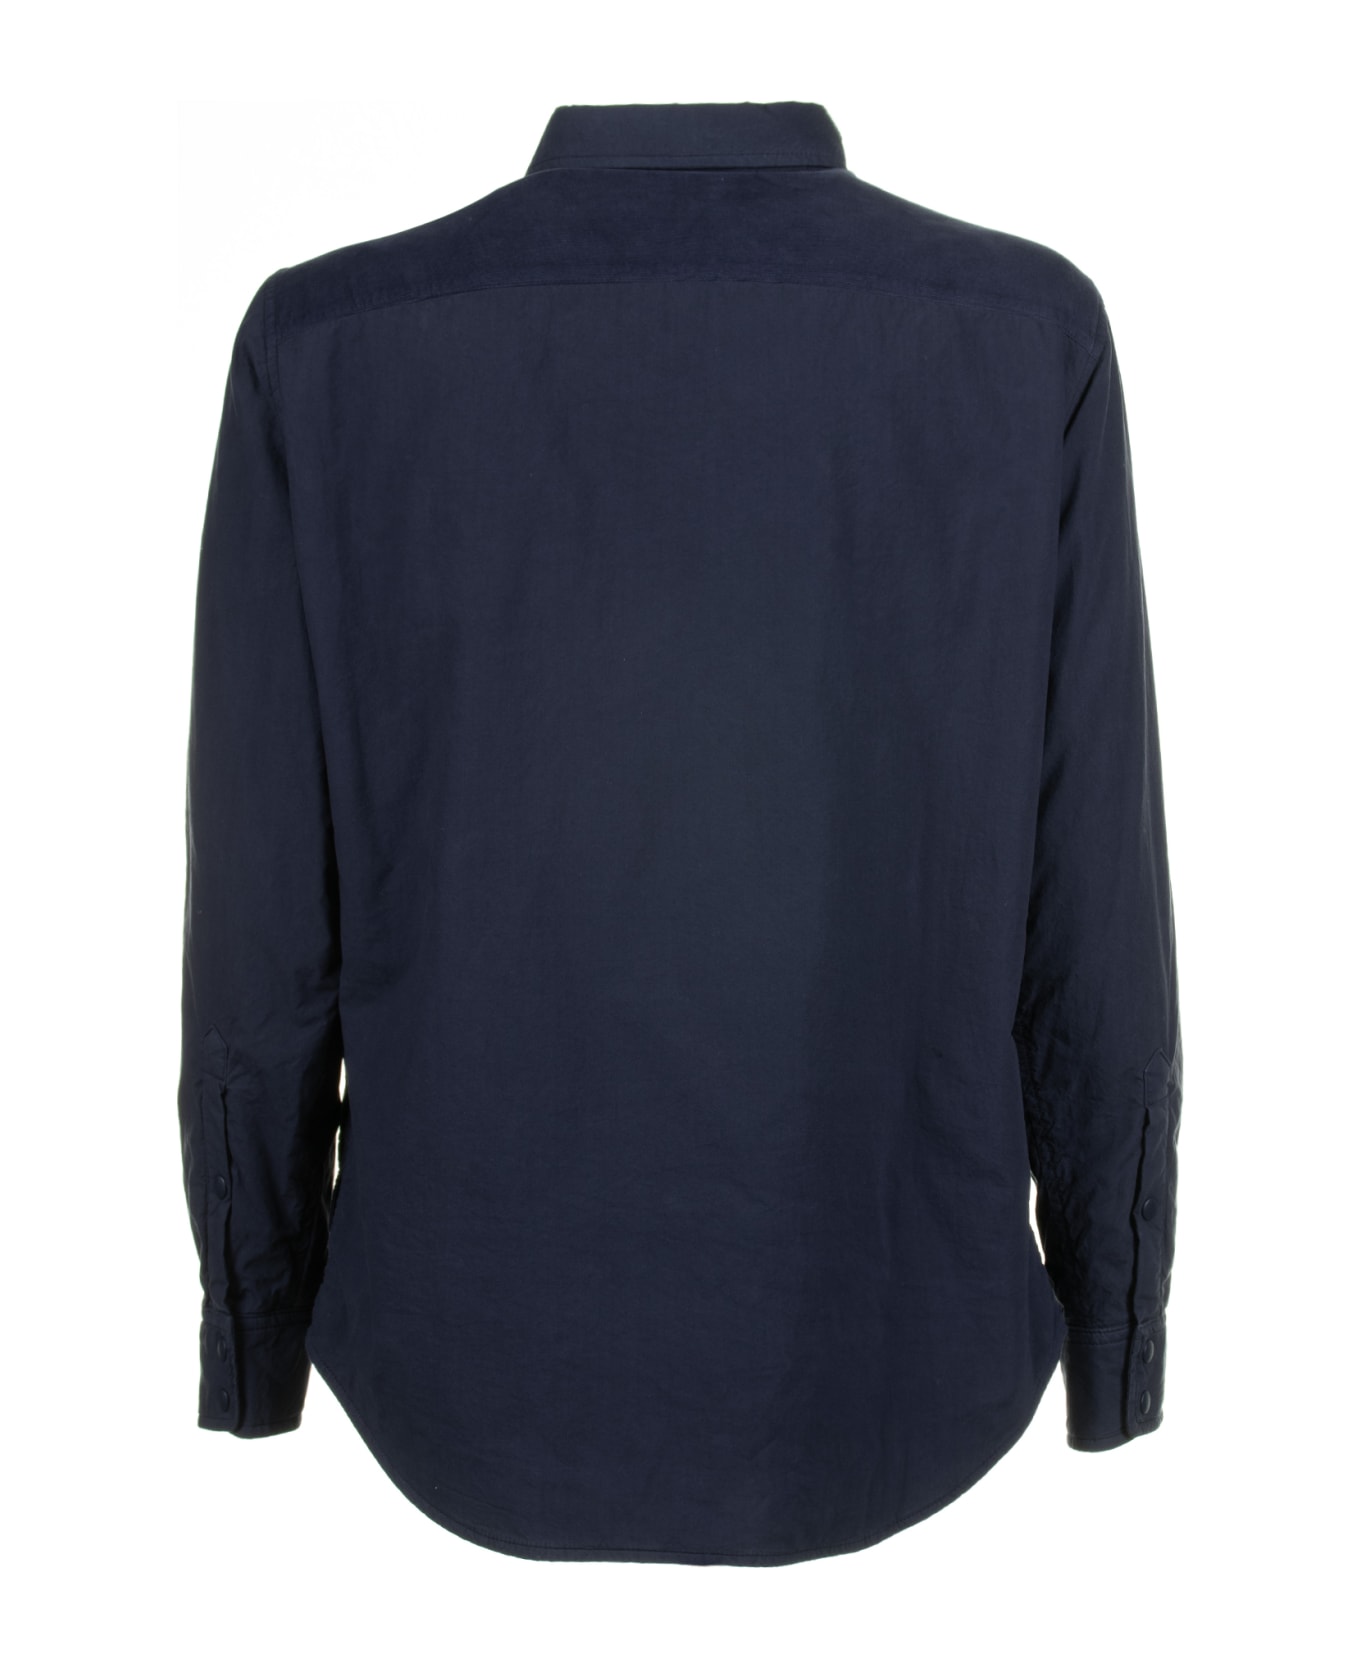 Aspesi Navy Blue Jacket With Buttons And Pockets - BLUE